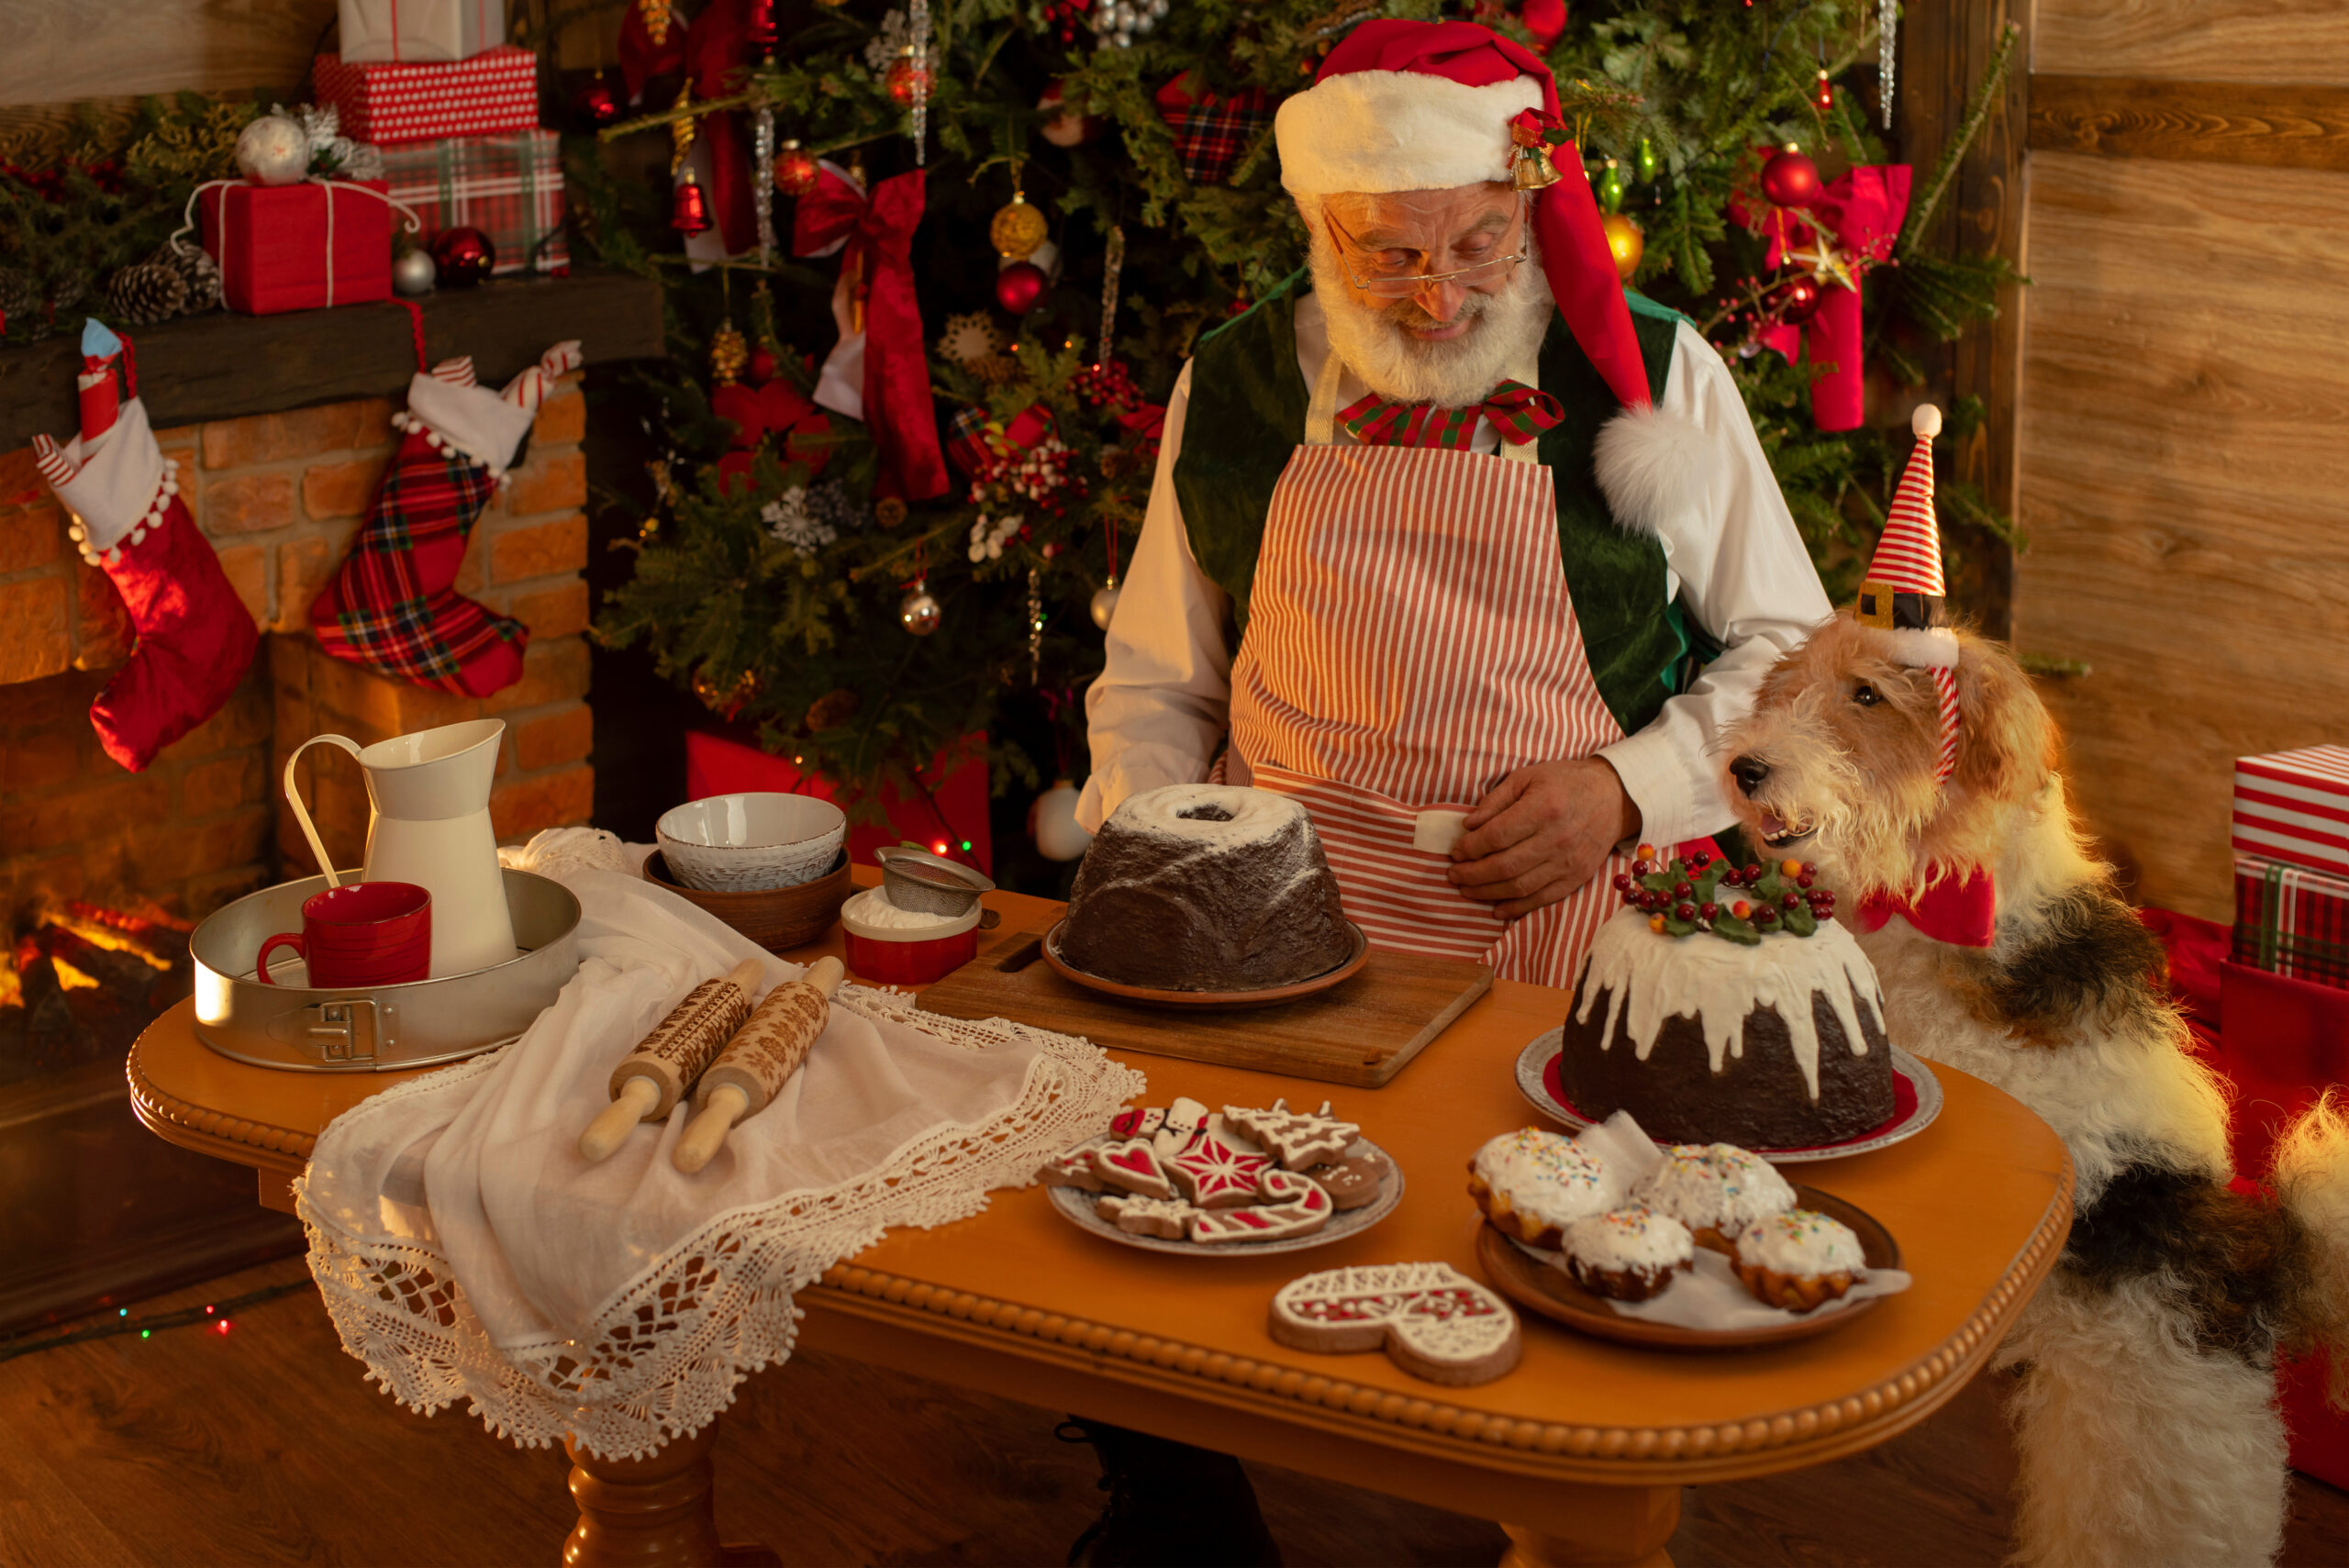 Santa Claus with real white beard indoors Log Cabin. Grandpa cooking treat, gingerbread, pudding for Christmas Eve Party. Senior model with real beard cosplay Father Christmas playing with dog fox terrier